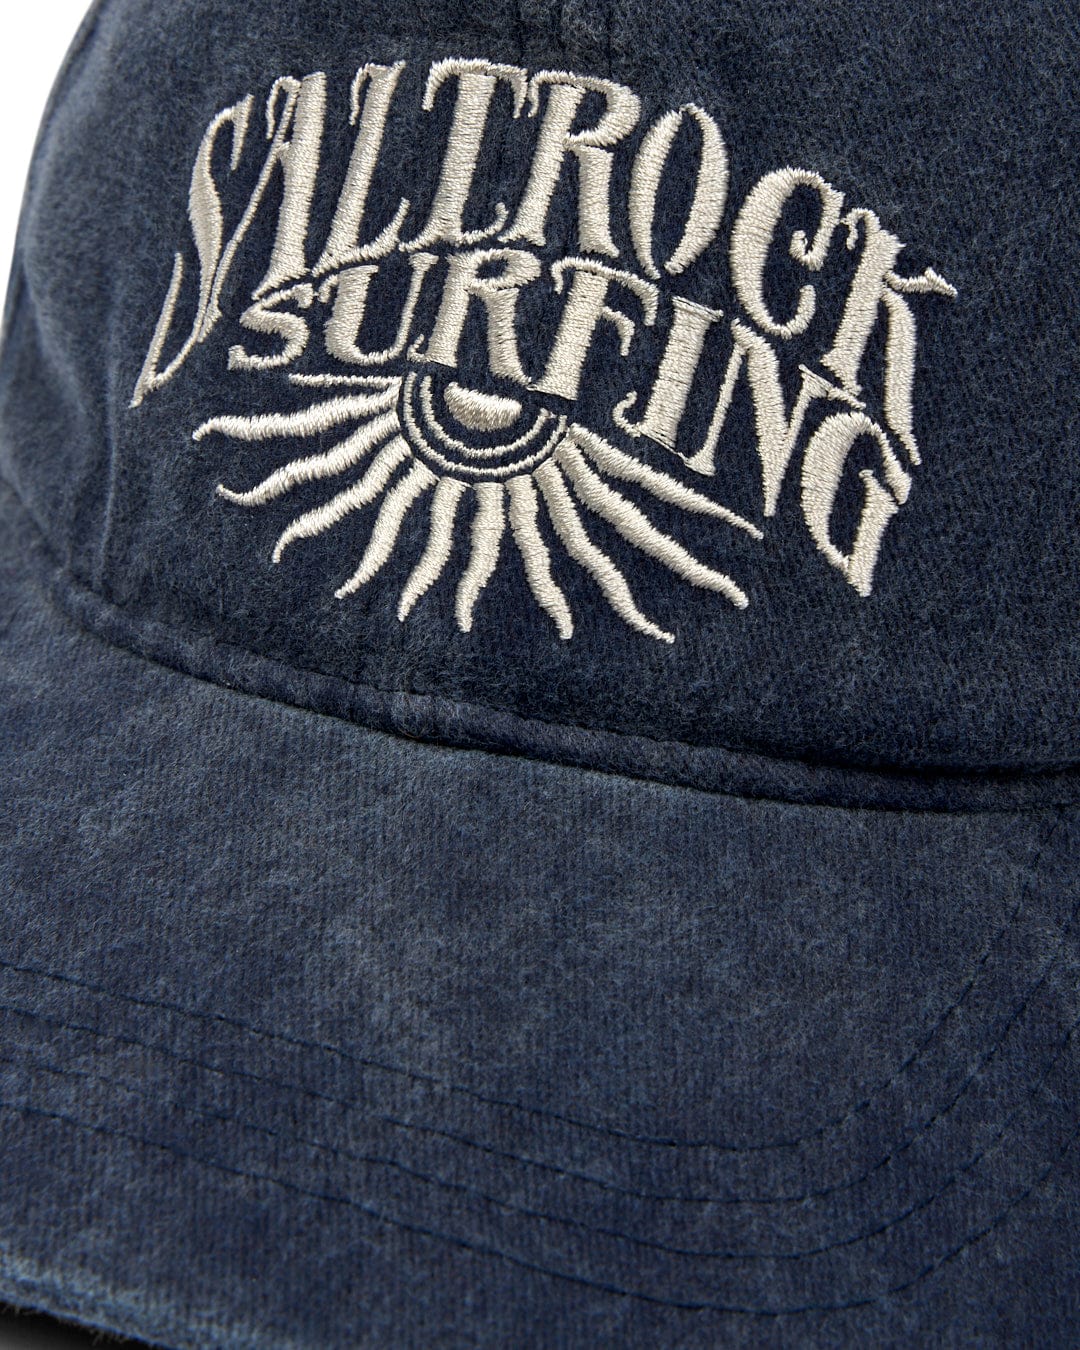 Close-up of a navy blue cotton Sunburst Cap - Dark Blue with Saltrock branding embroidered on it in white thread.